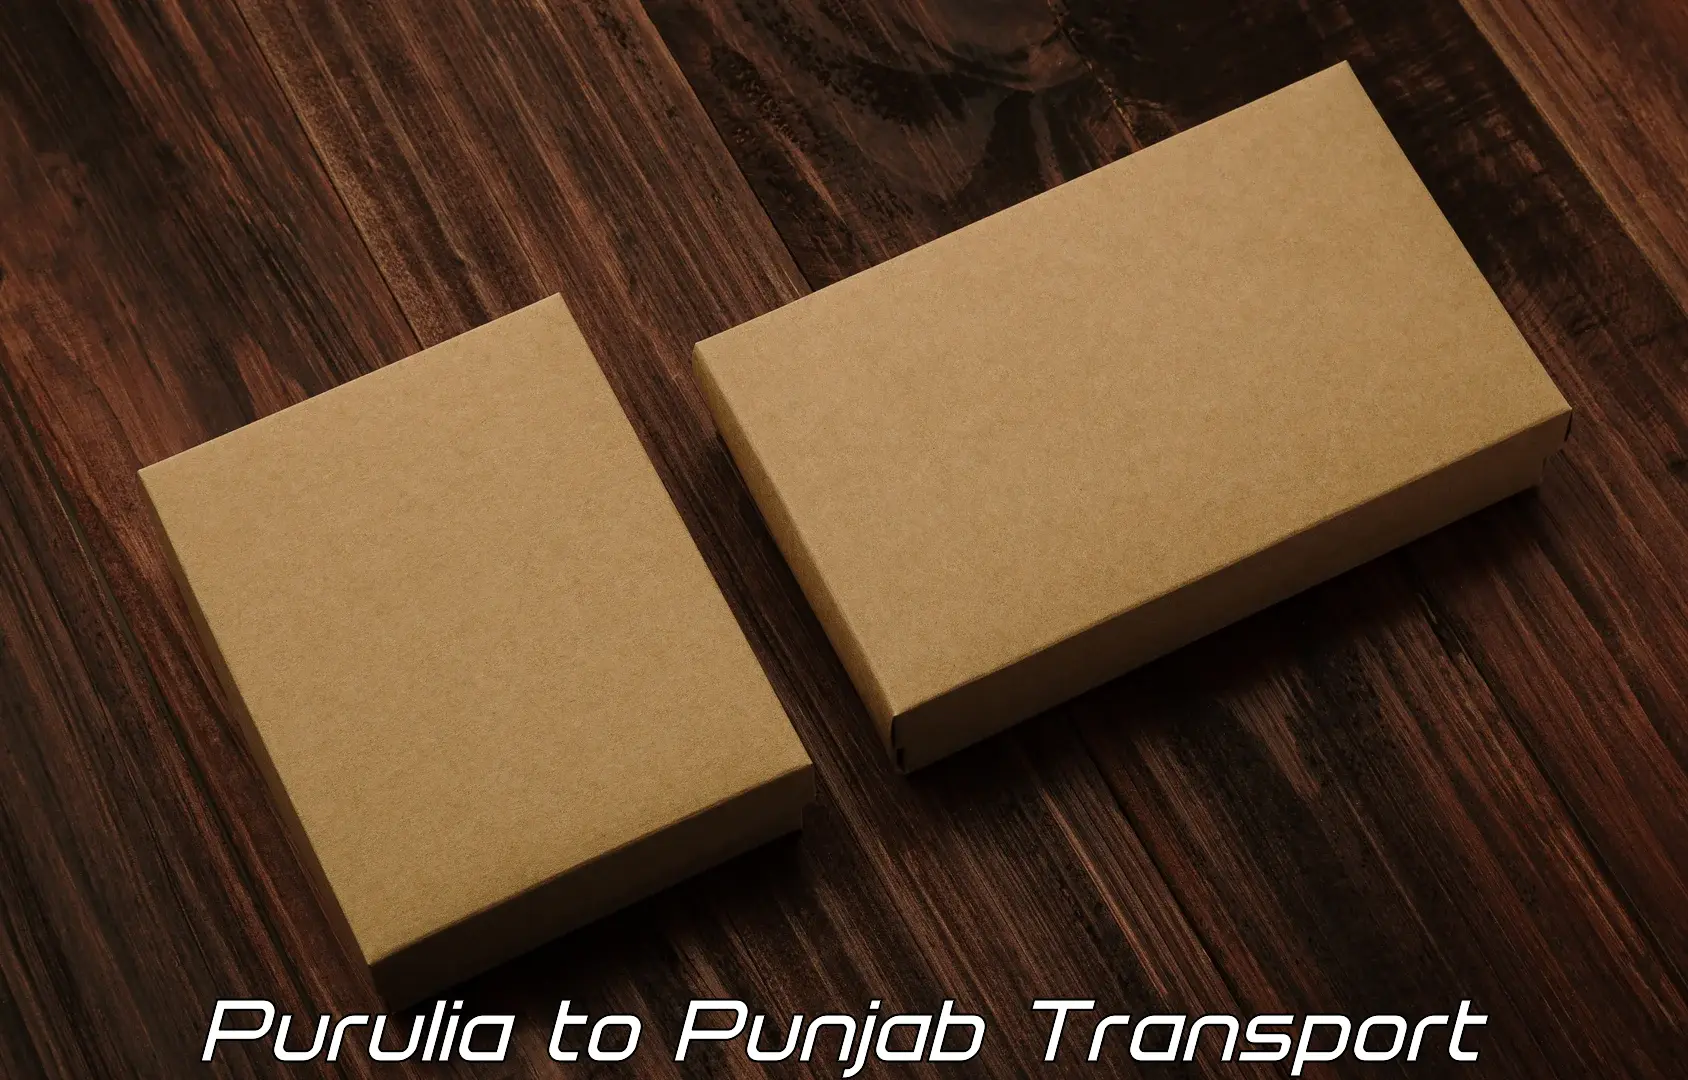 Delivery service Purulia to Punjab